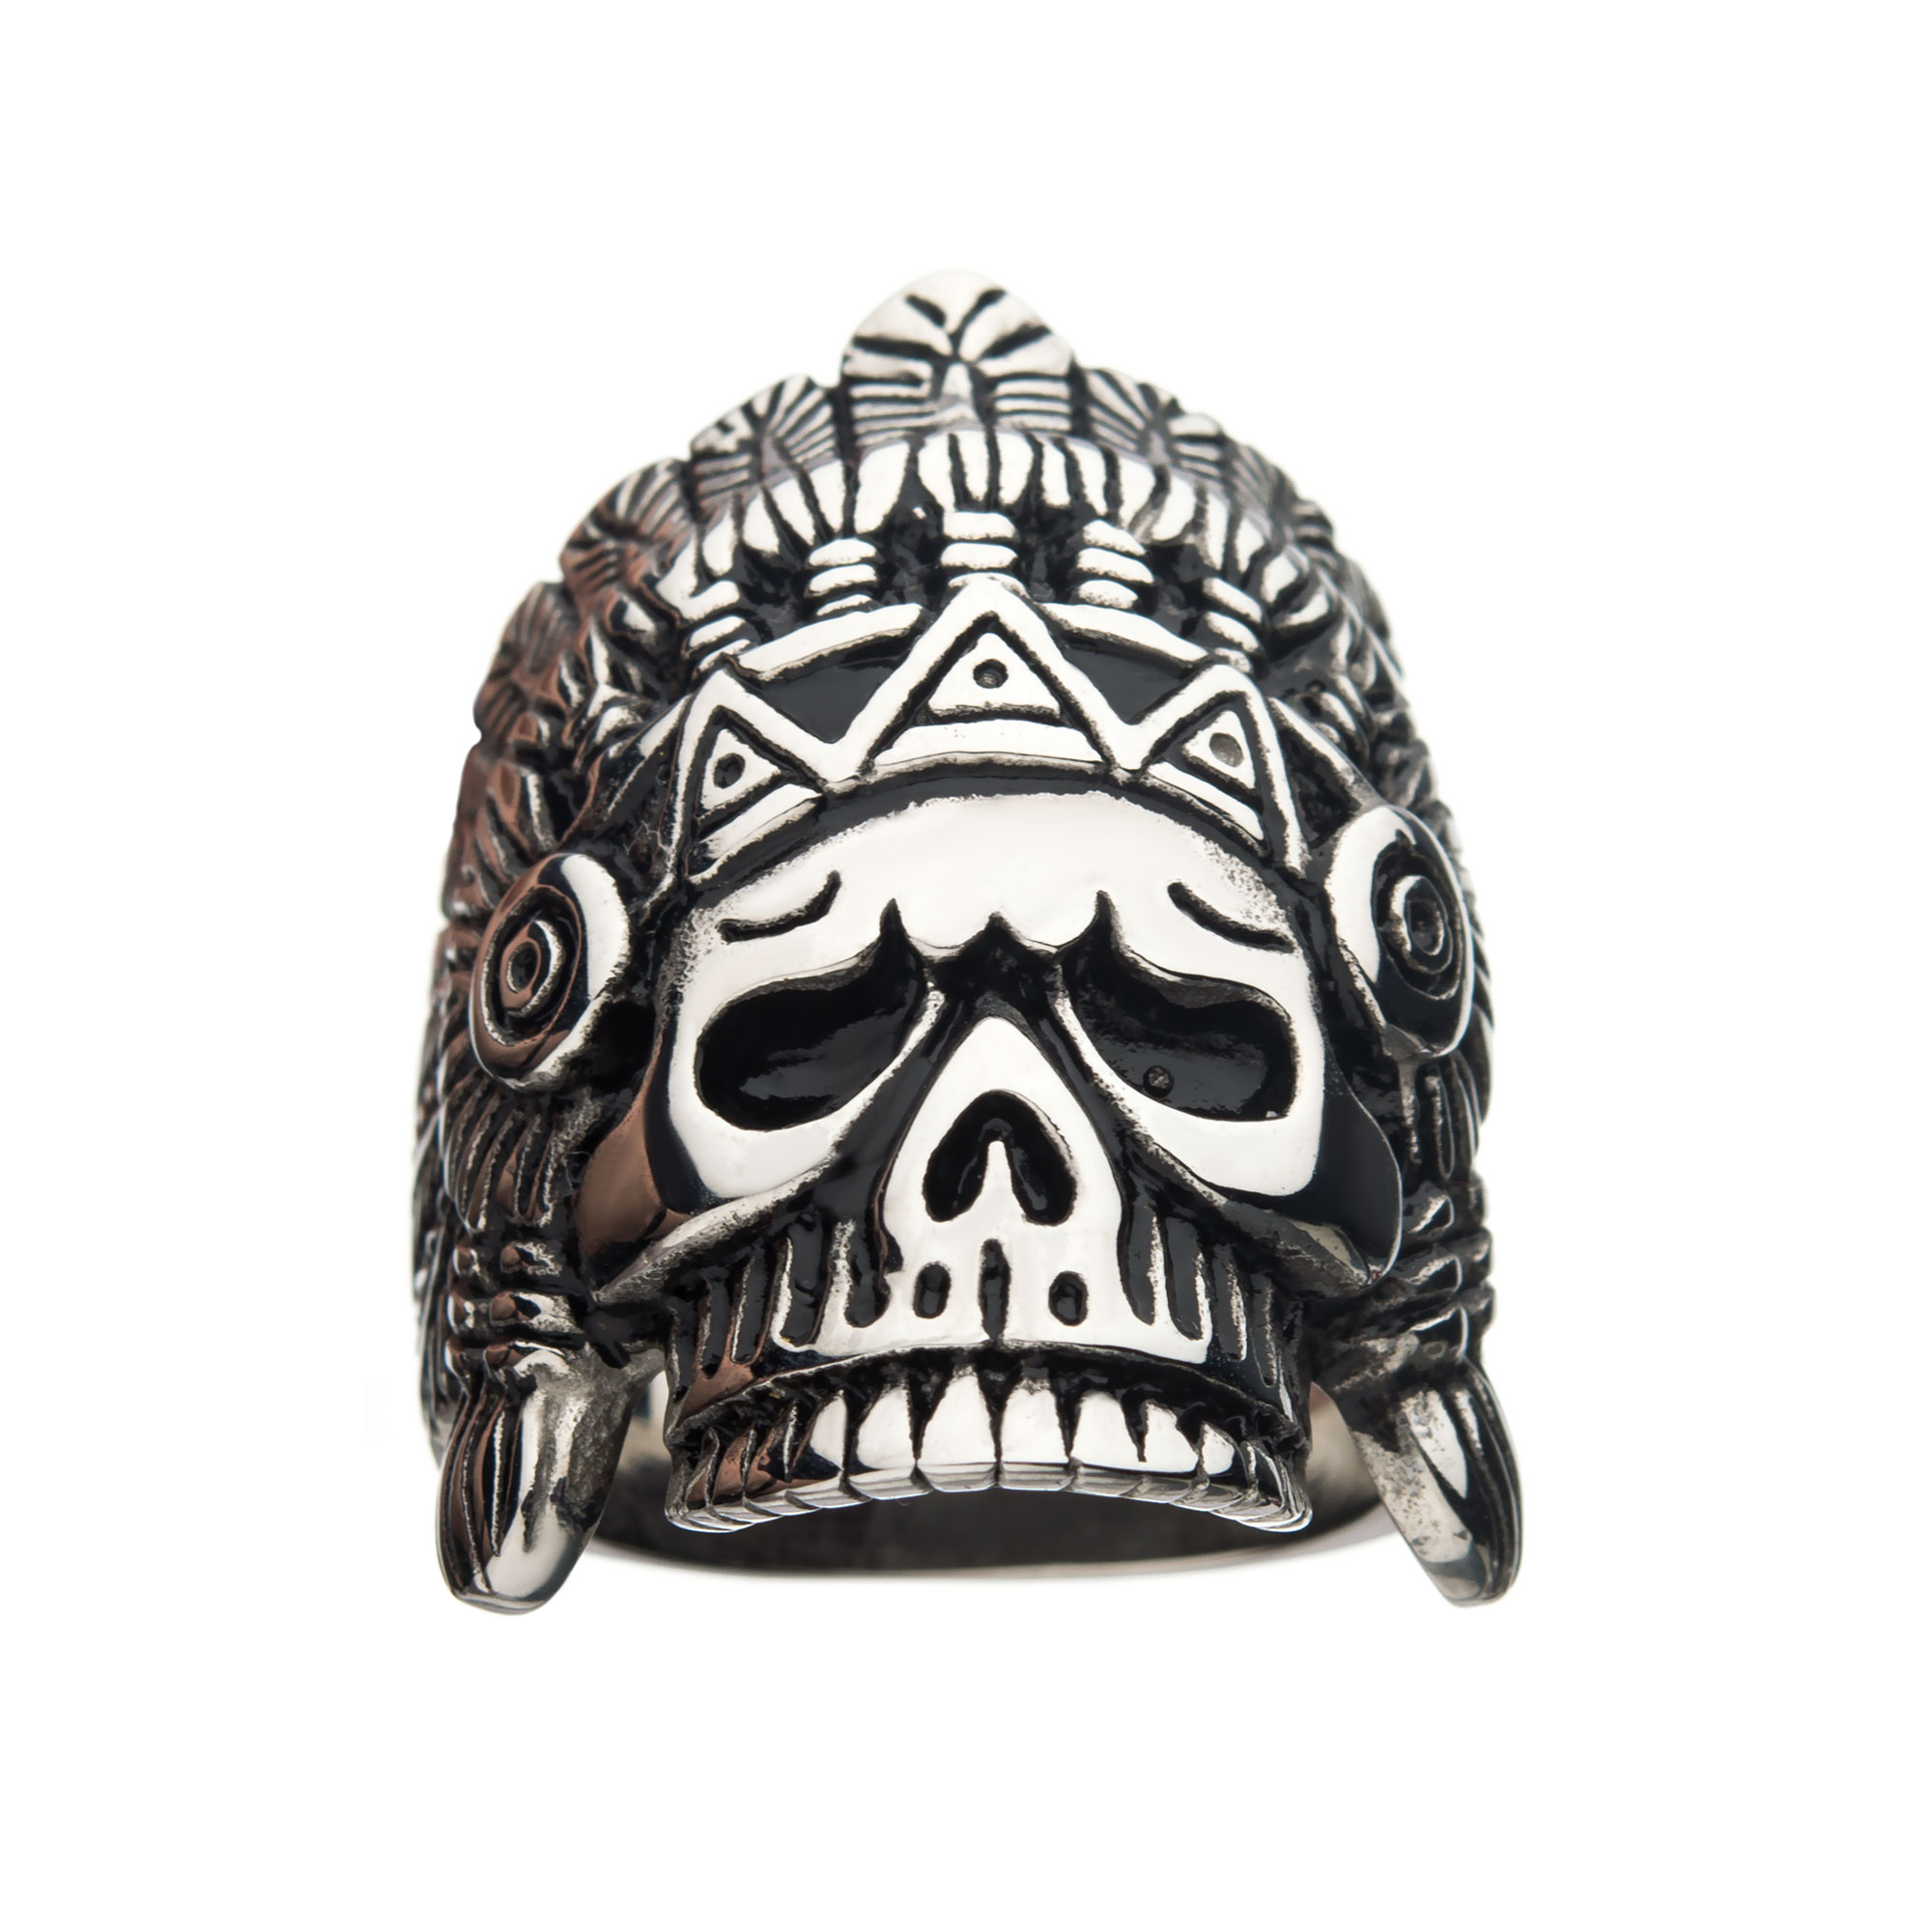 Oxidized Stainless Steel Chief Skull Ring Image 2 Lewis Jewelers, Inc. Ansonia, CT